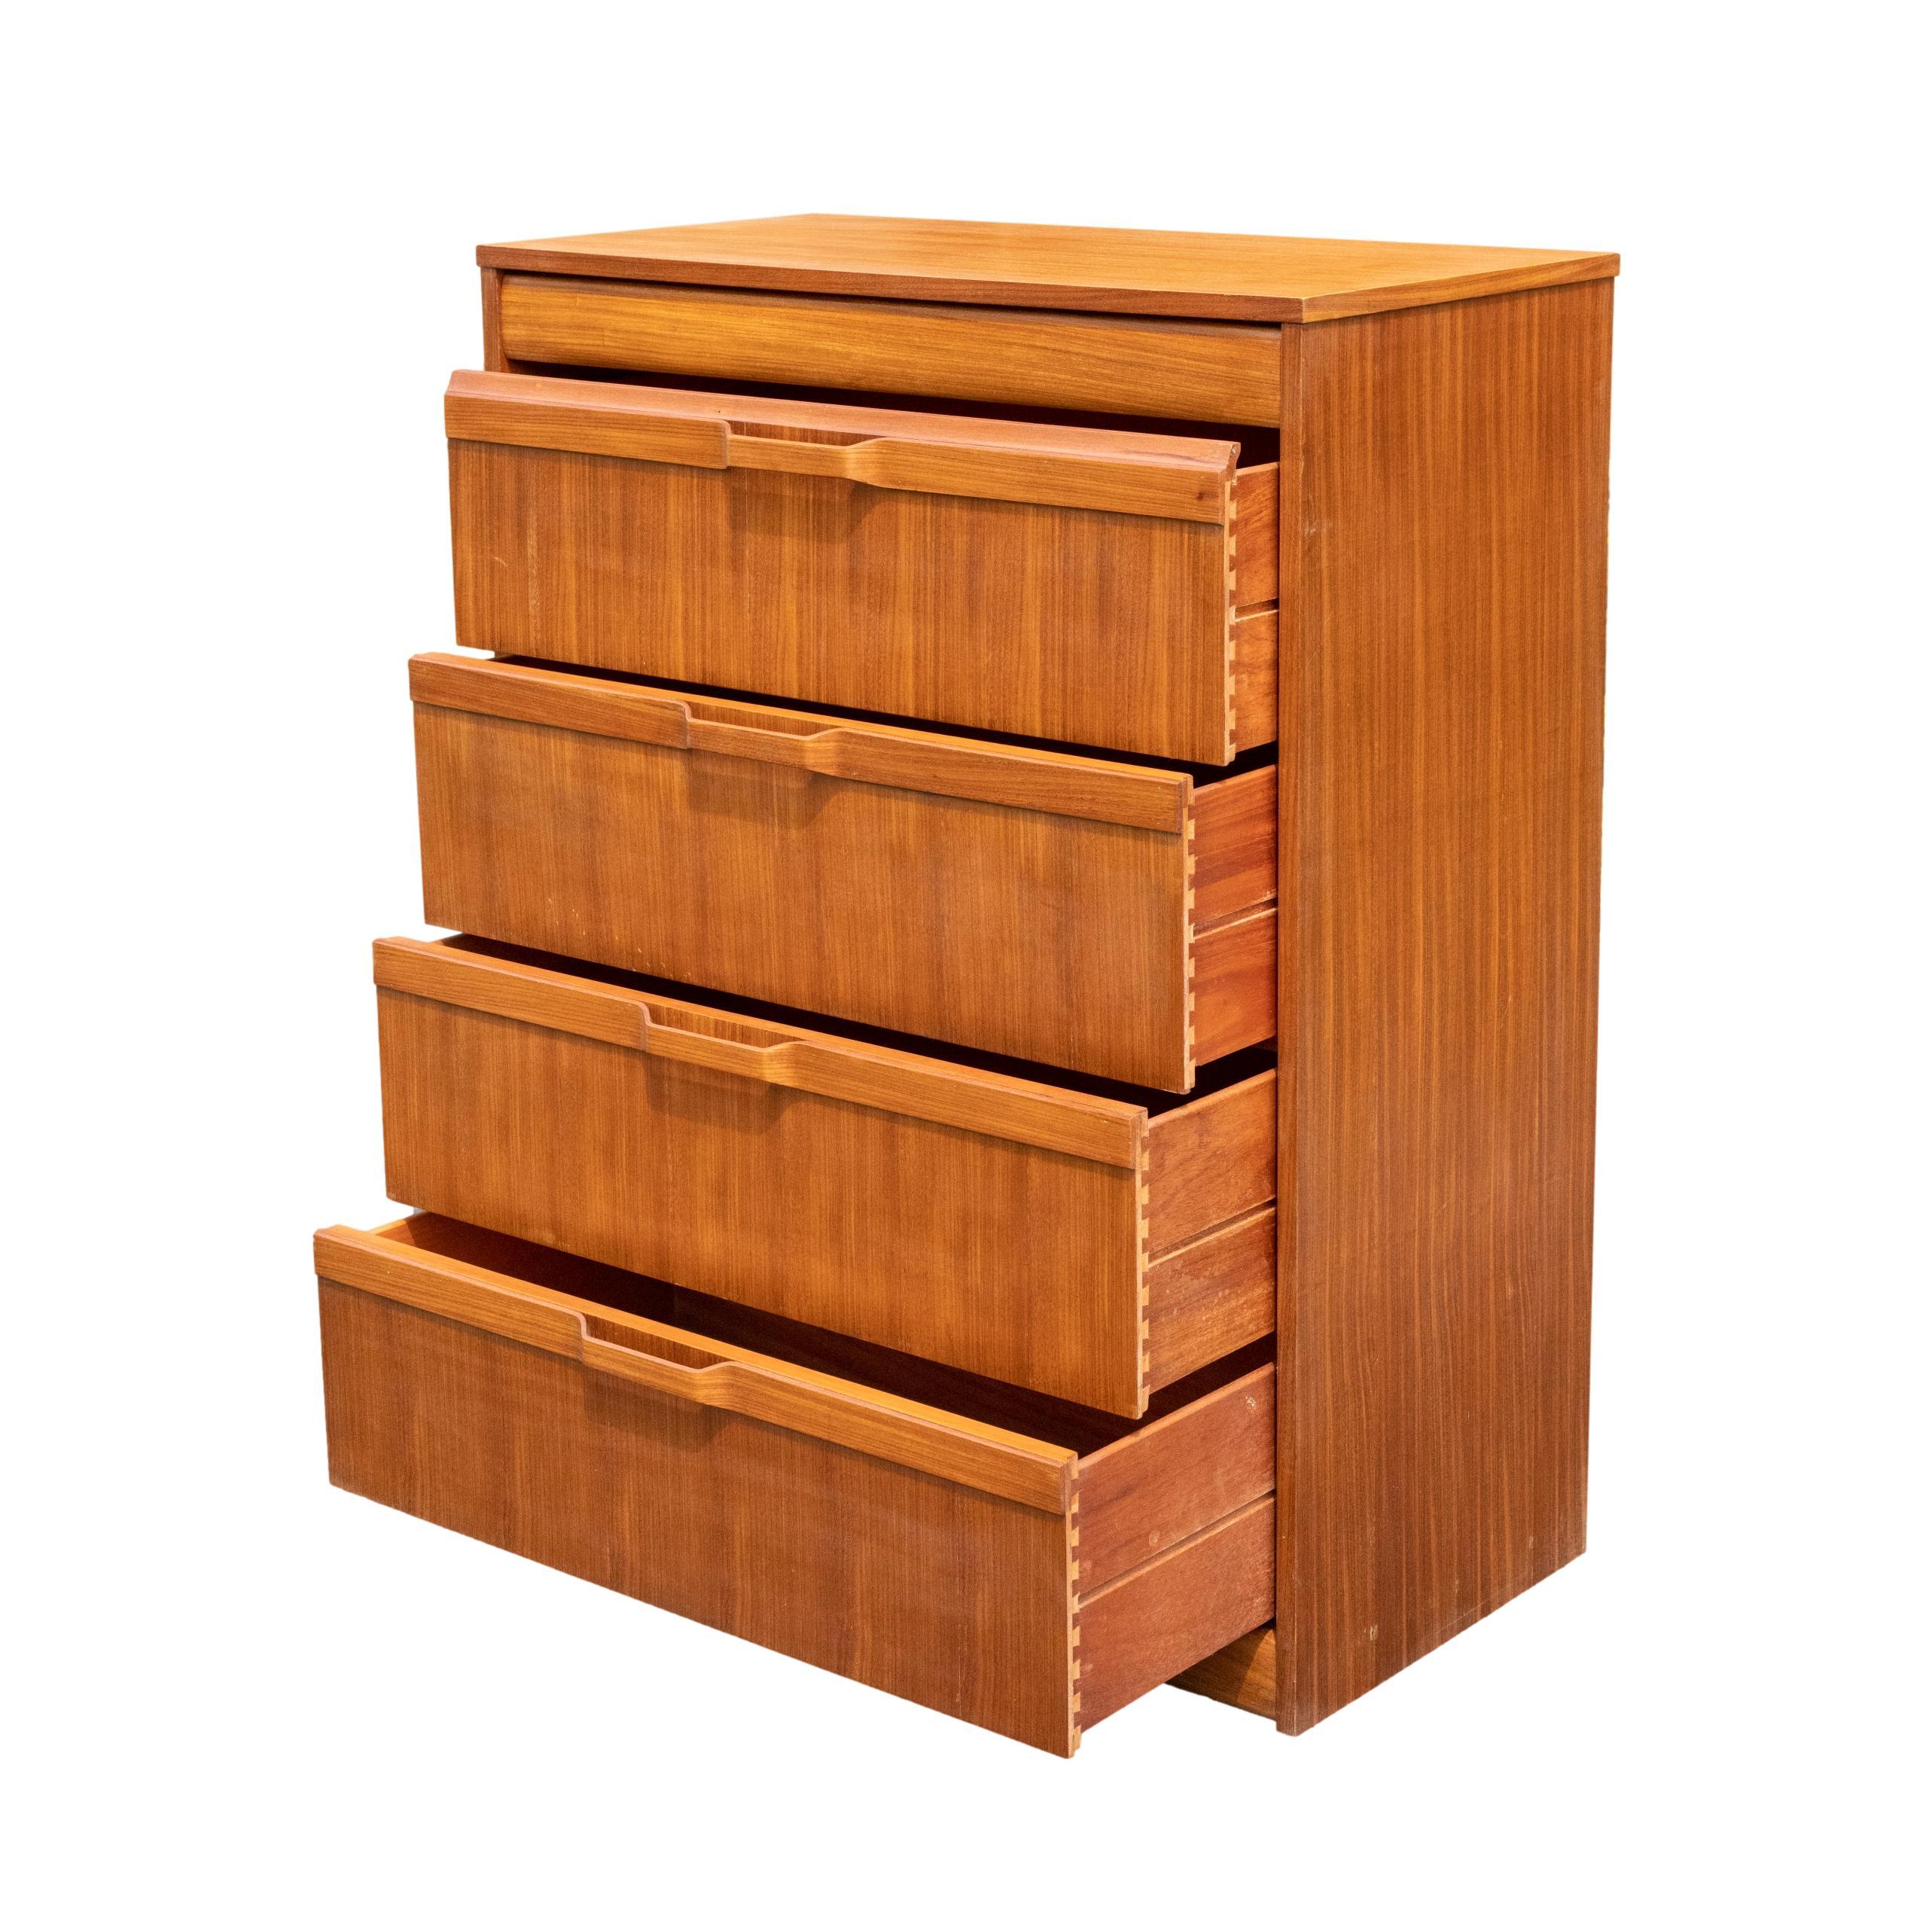 Machine-Made Mid-Century Modern Teak and Elm Chest-of-Drawers, Danish, Dated 1971 For Sale